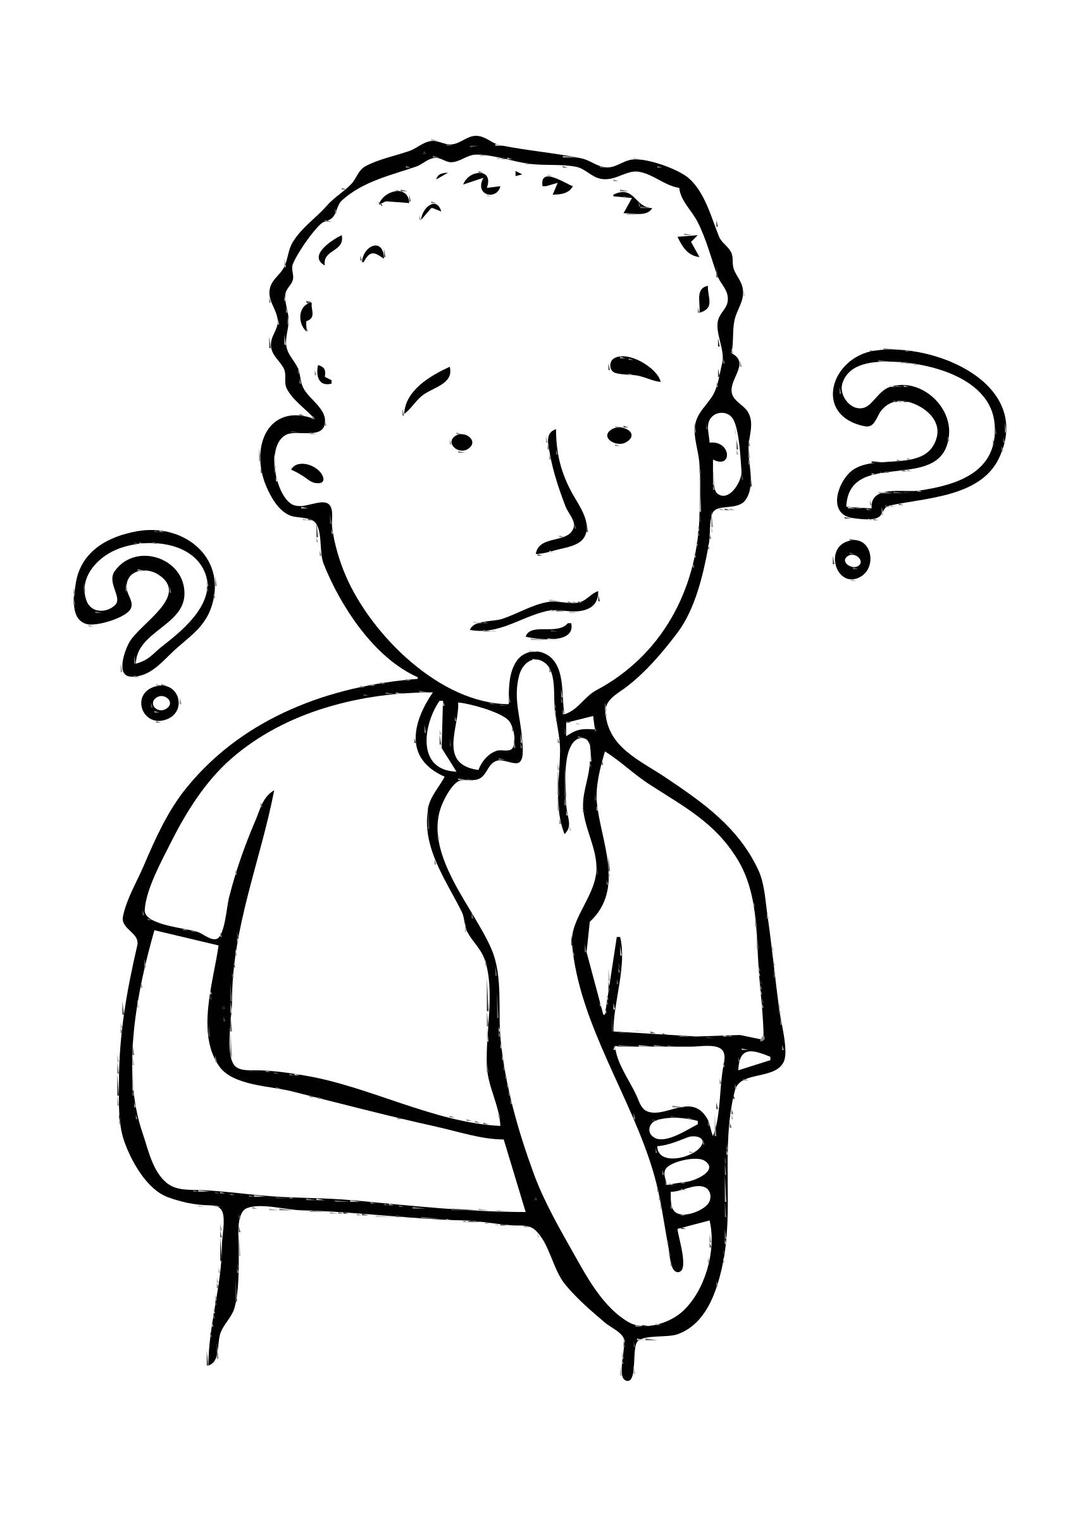 Boy Thinking of Question png transparent